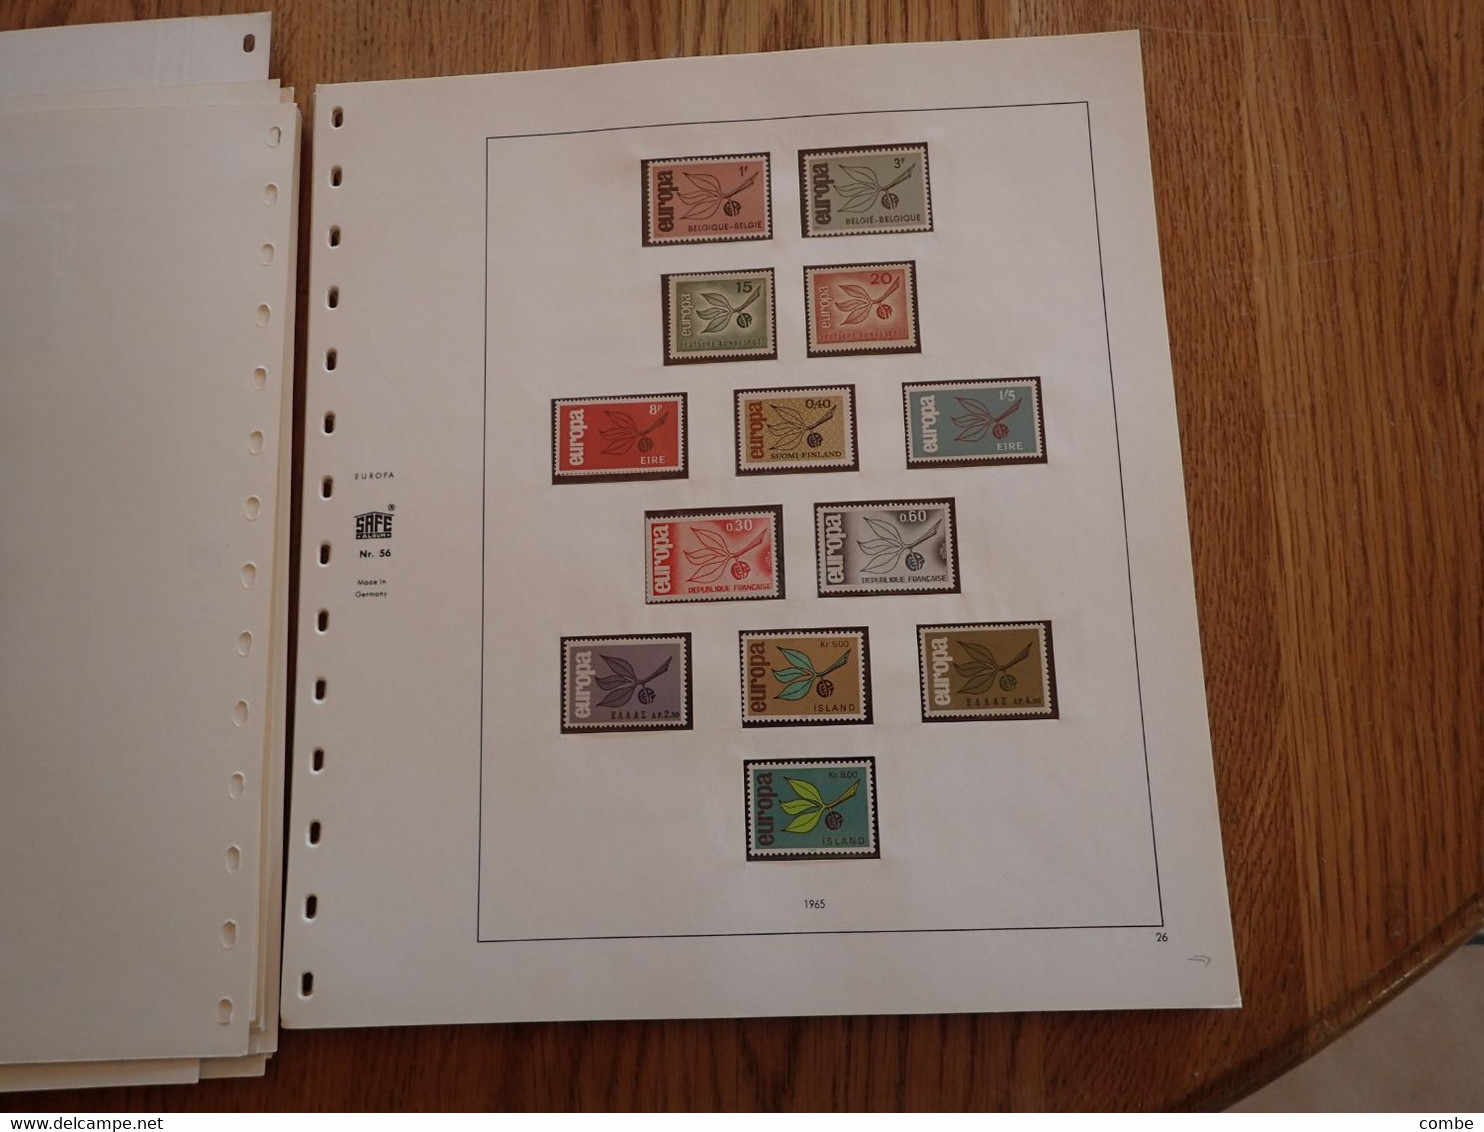 COLLECTION. EUROPA. TIMBRES NEUFS MNH. SUR FEUILLES SAFE. 42 SCANS. COTE ENORME. DONT CHYPRE 1963. Yv 217/219/ 15